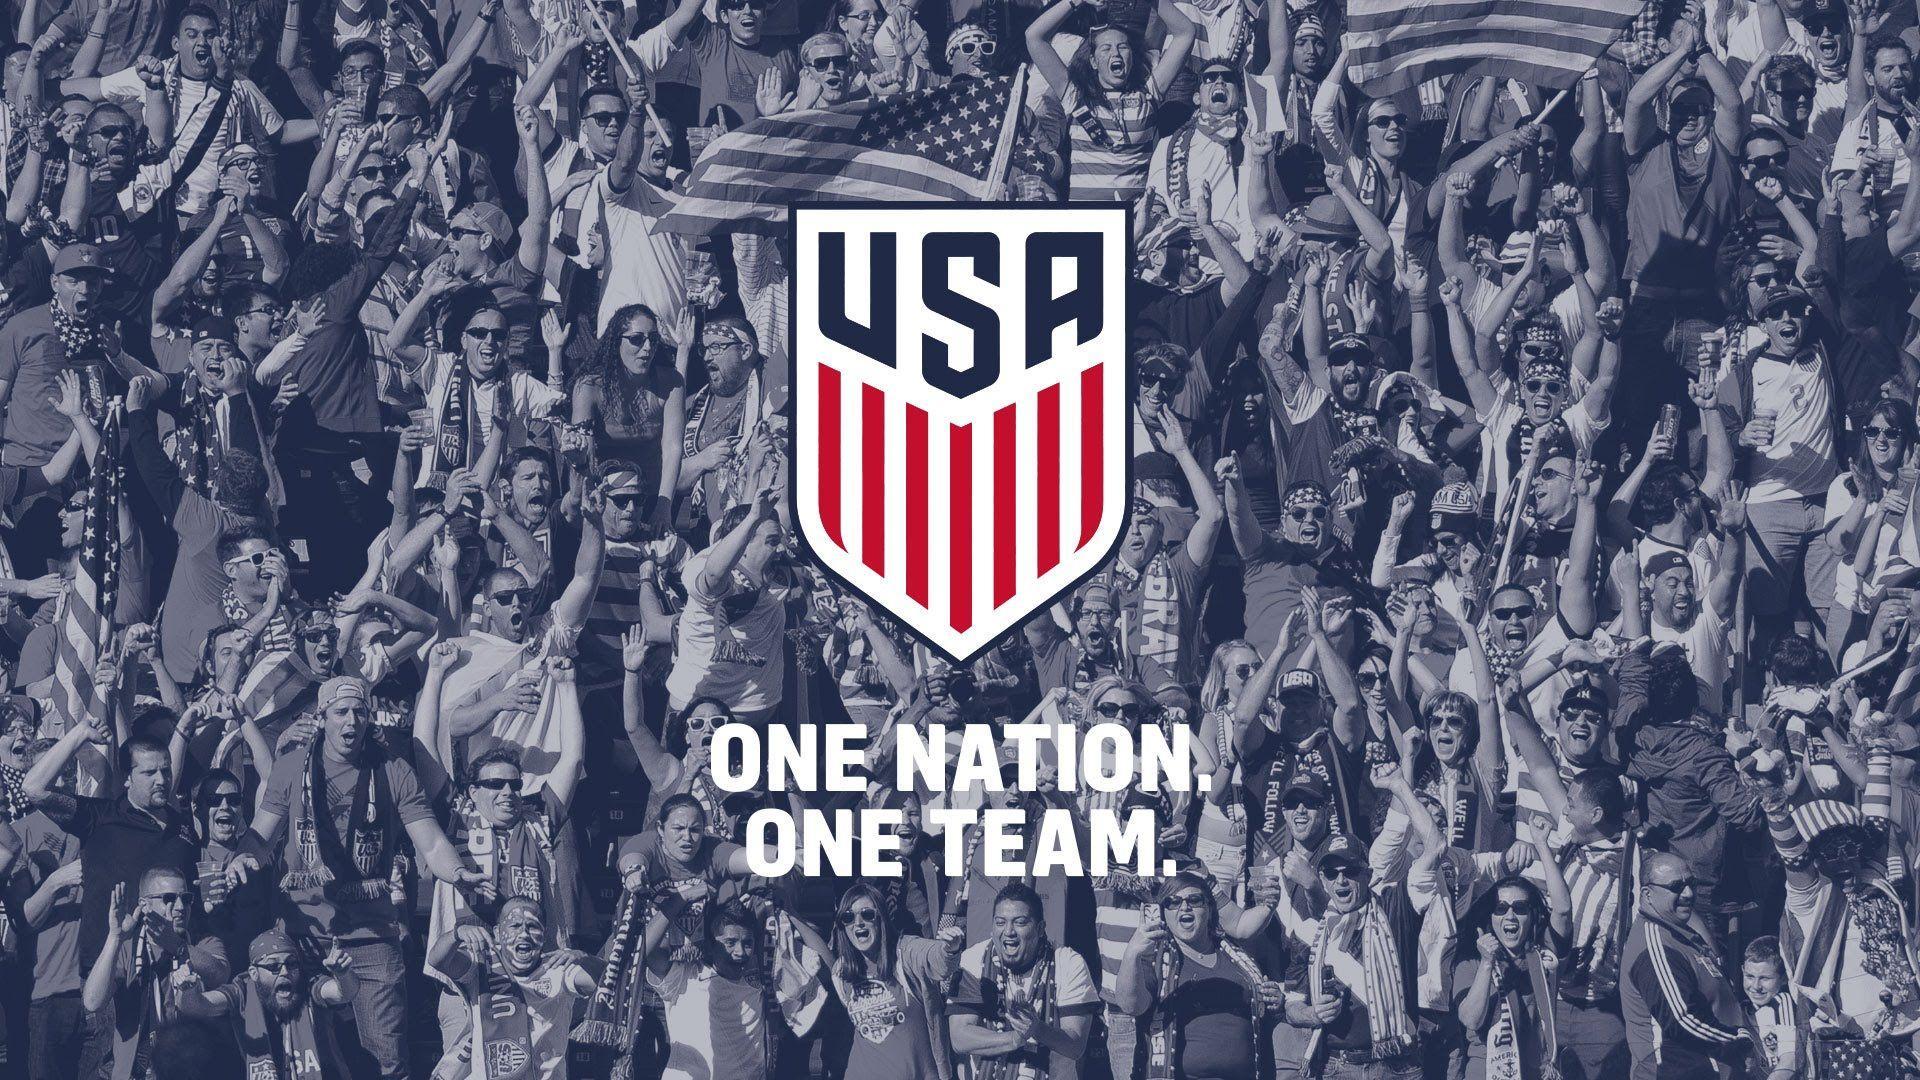 One Nation. One Team